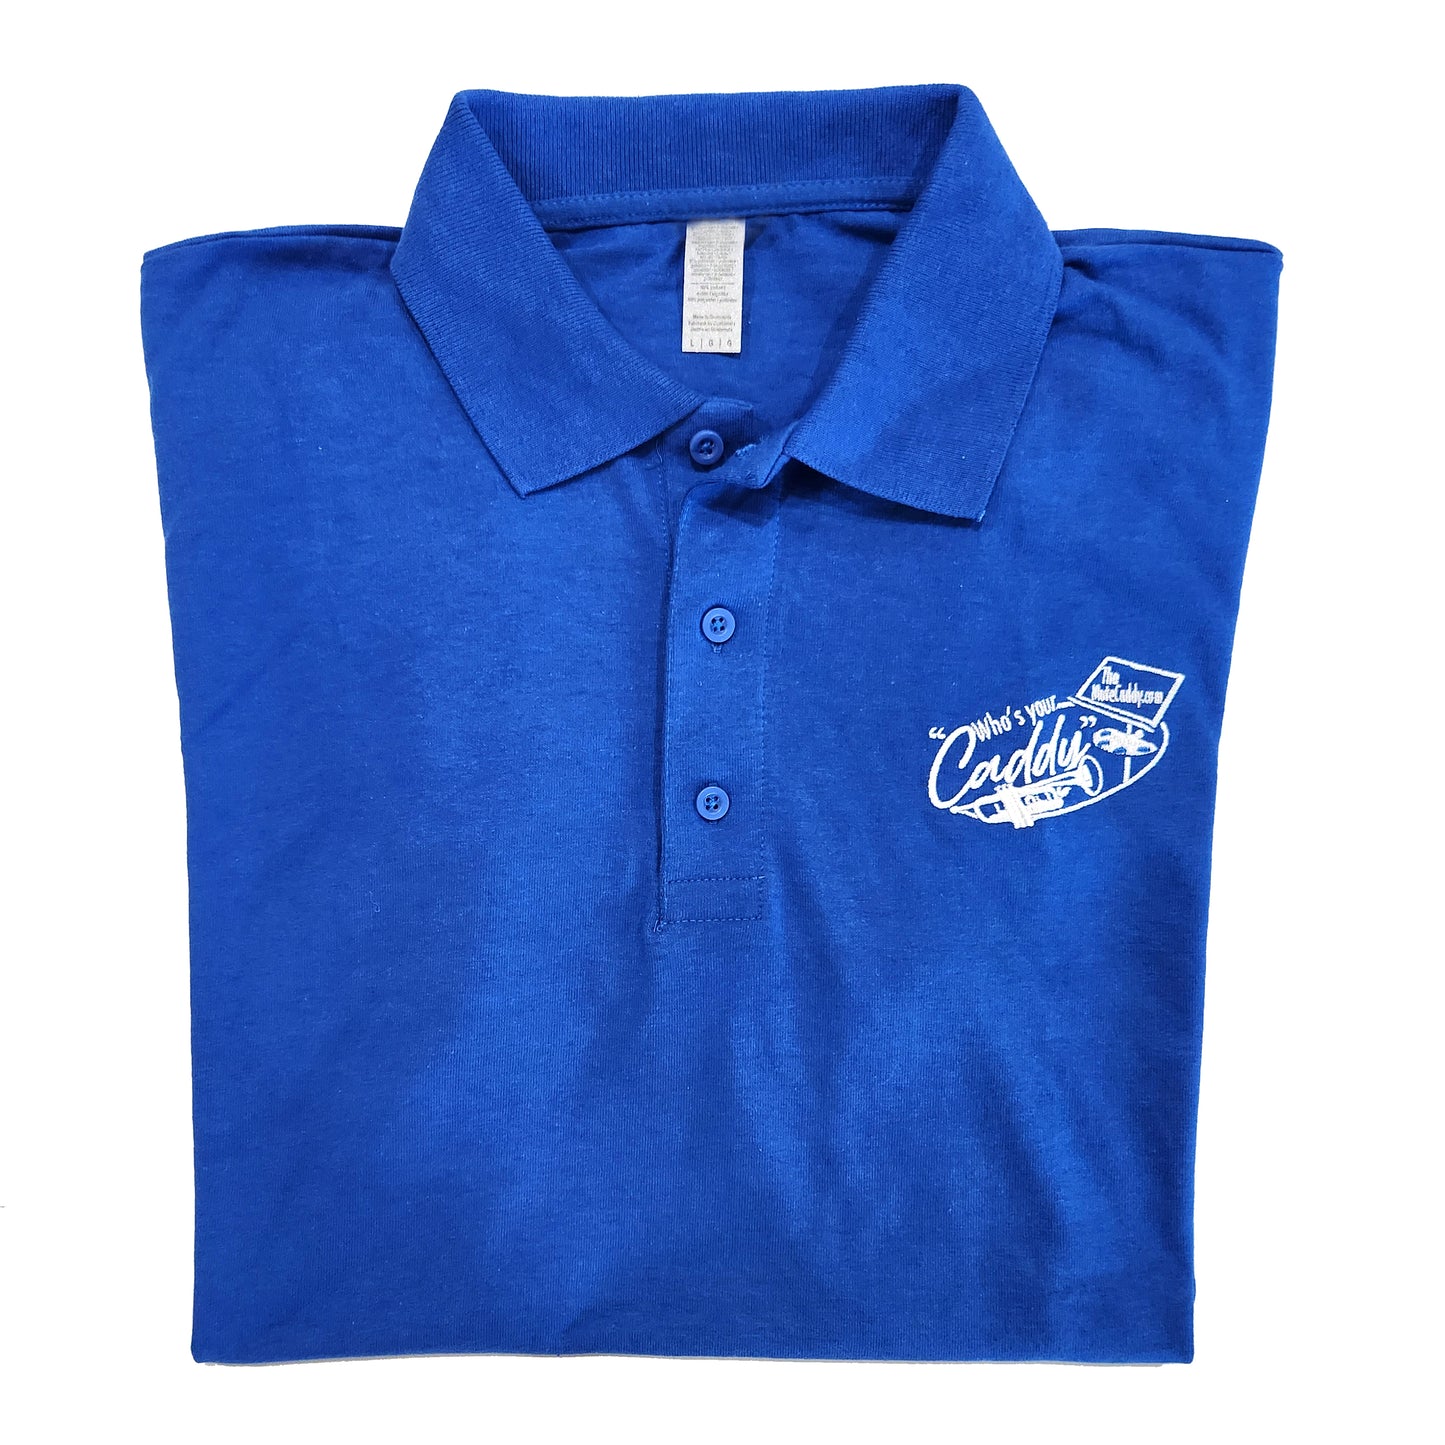 Official THE MUTE CADDY™ Polo shirt